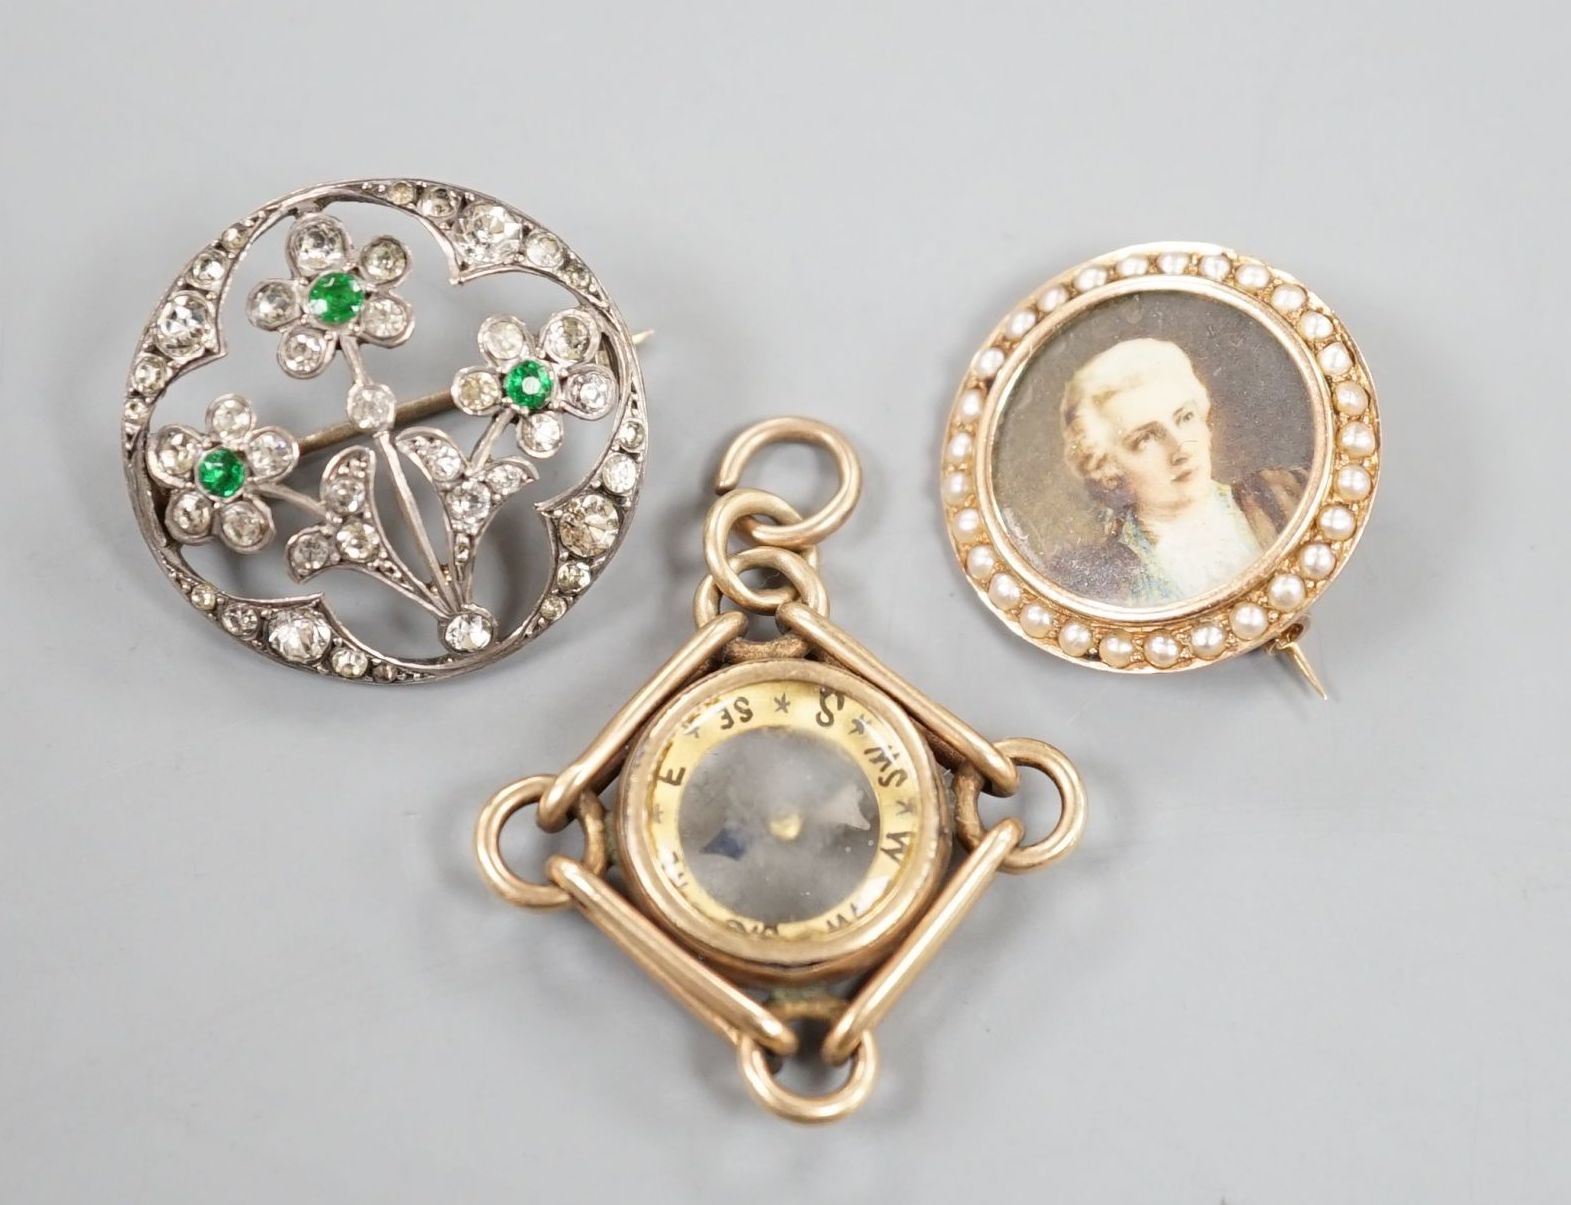 An American 10k yellow metal compass pendant, 29mm, gross 7.1 grams, a 585 and split pearl set circular portrait brooch, gross 4 grams and a two colour paste set brooch.